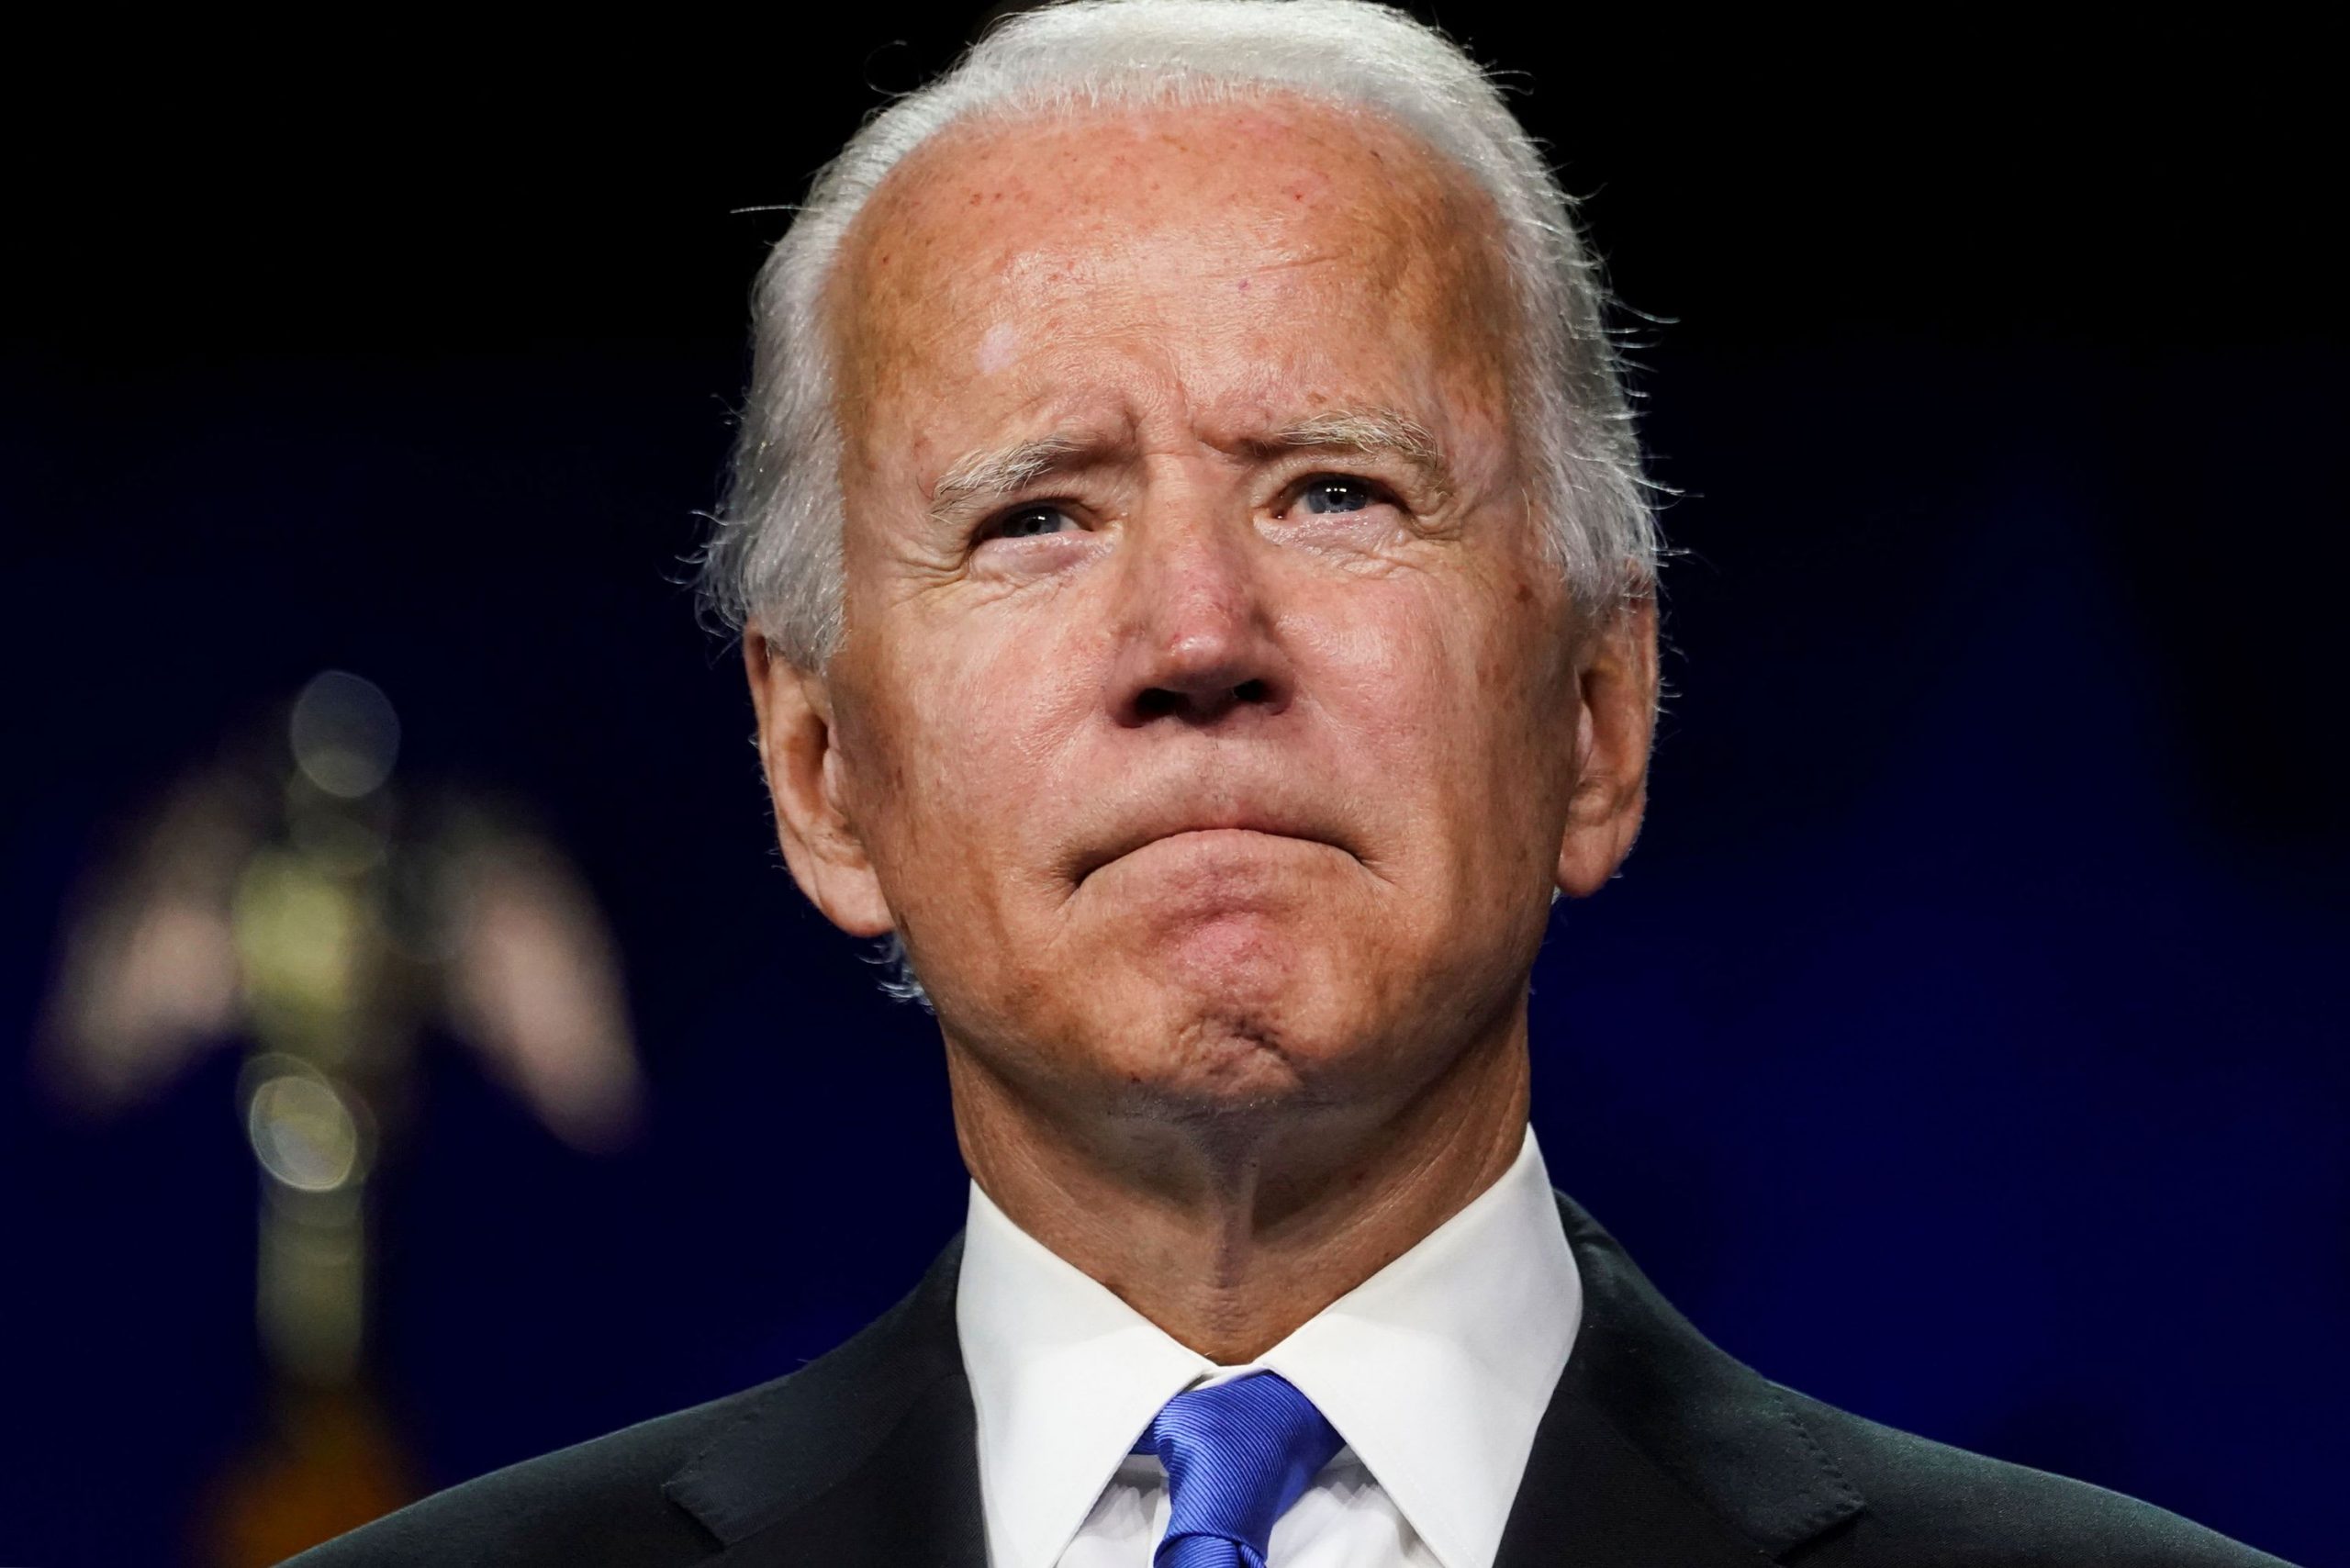 Biden on Trump Not Attending Inauguration: “It’s a Good Thing”